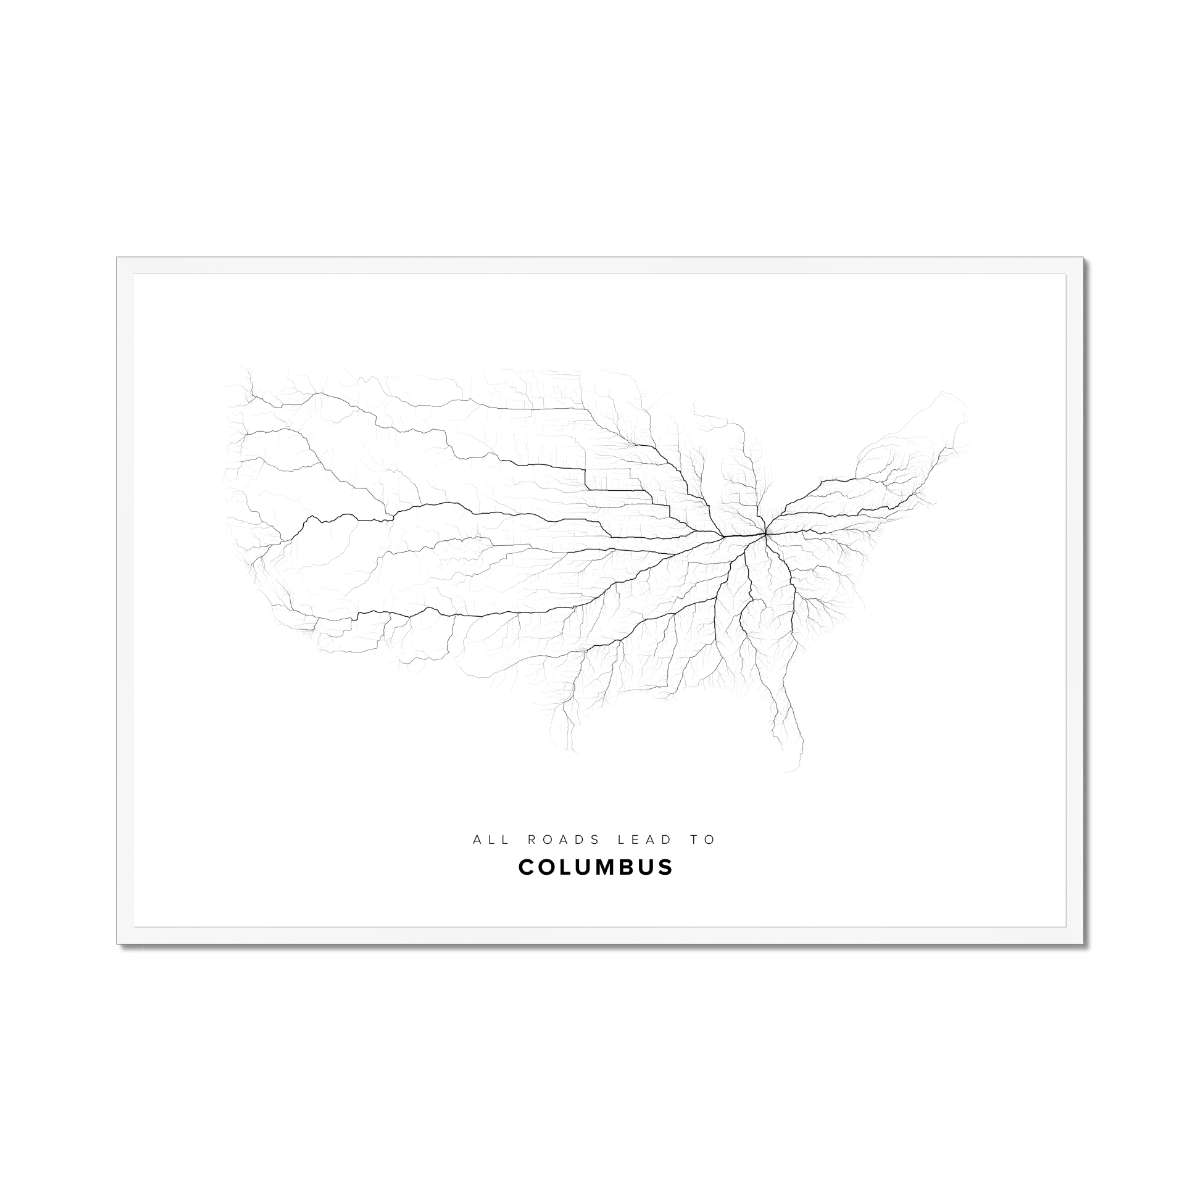 All roads lead to Columbus (United States of America) Fine Art Map Print